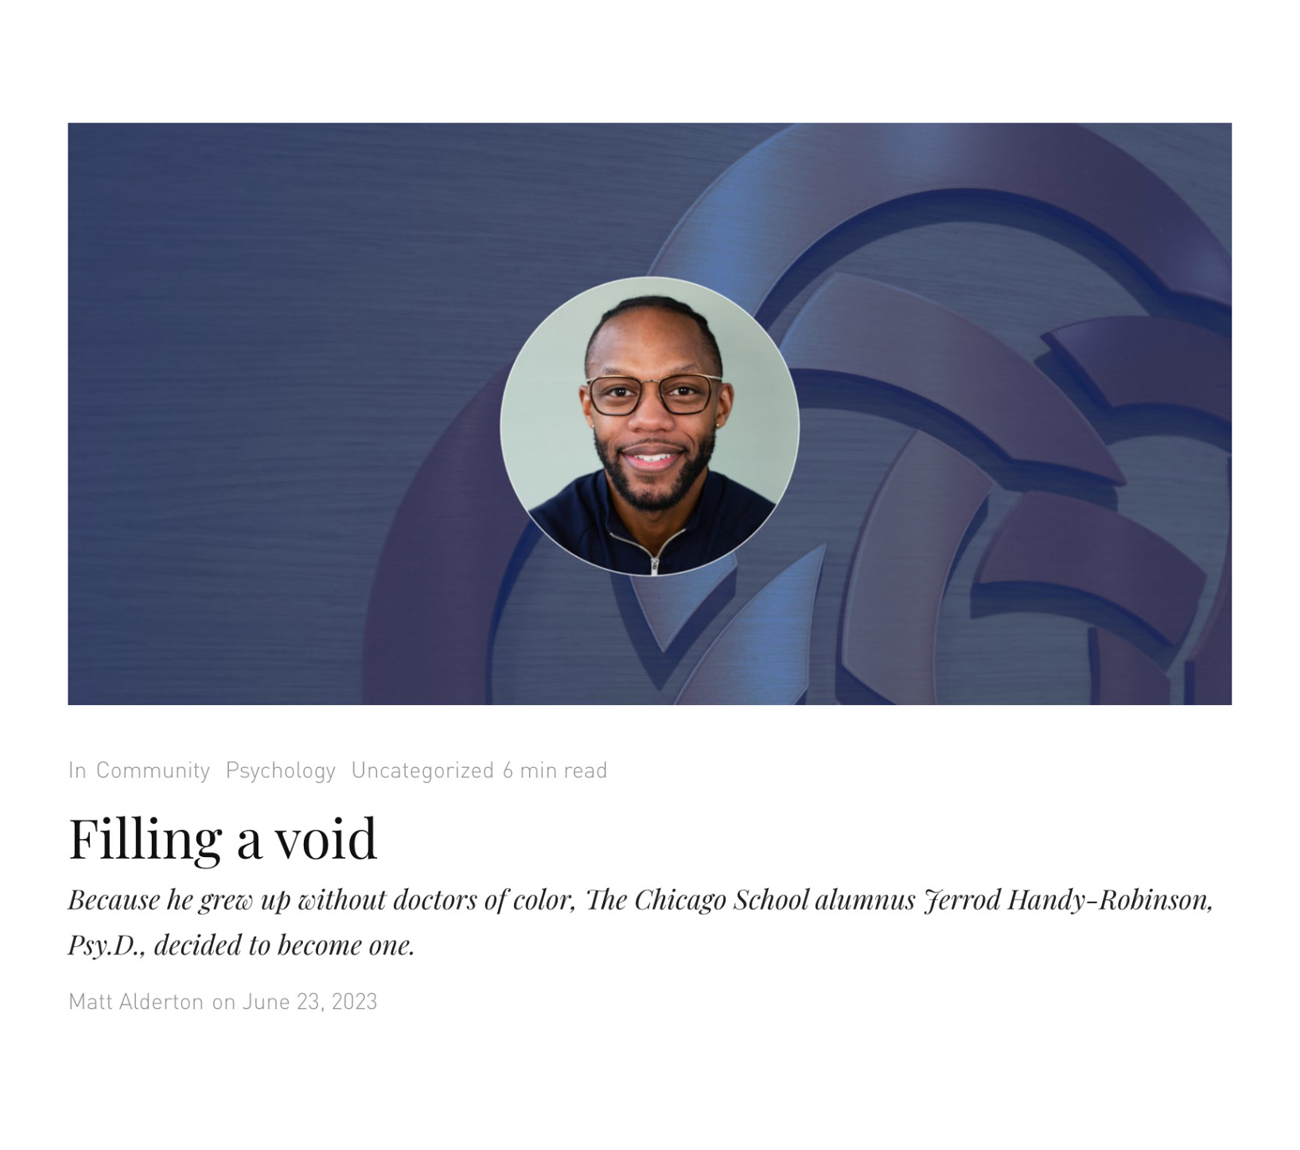 The Chicago School of Professional Psychology: "Filling a Void"